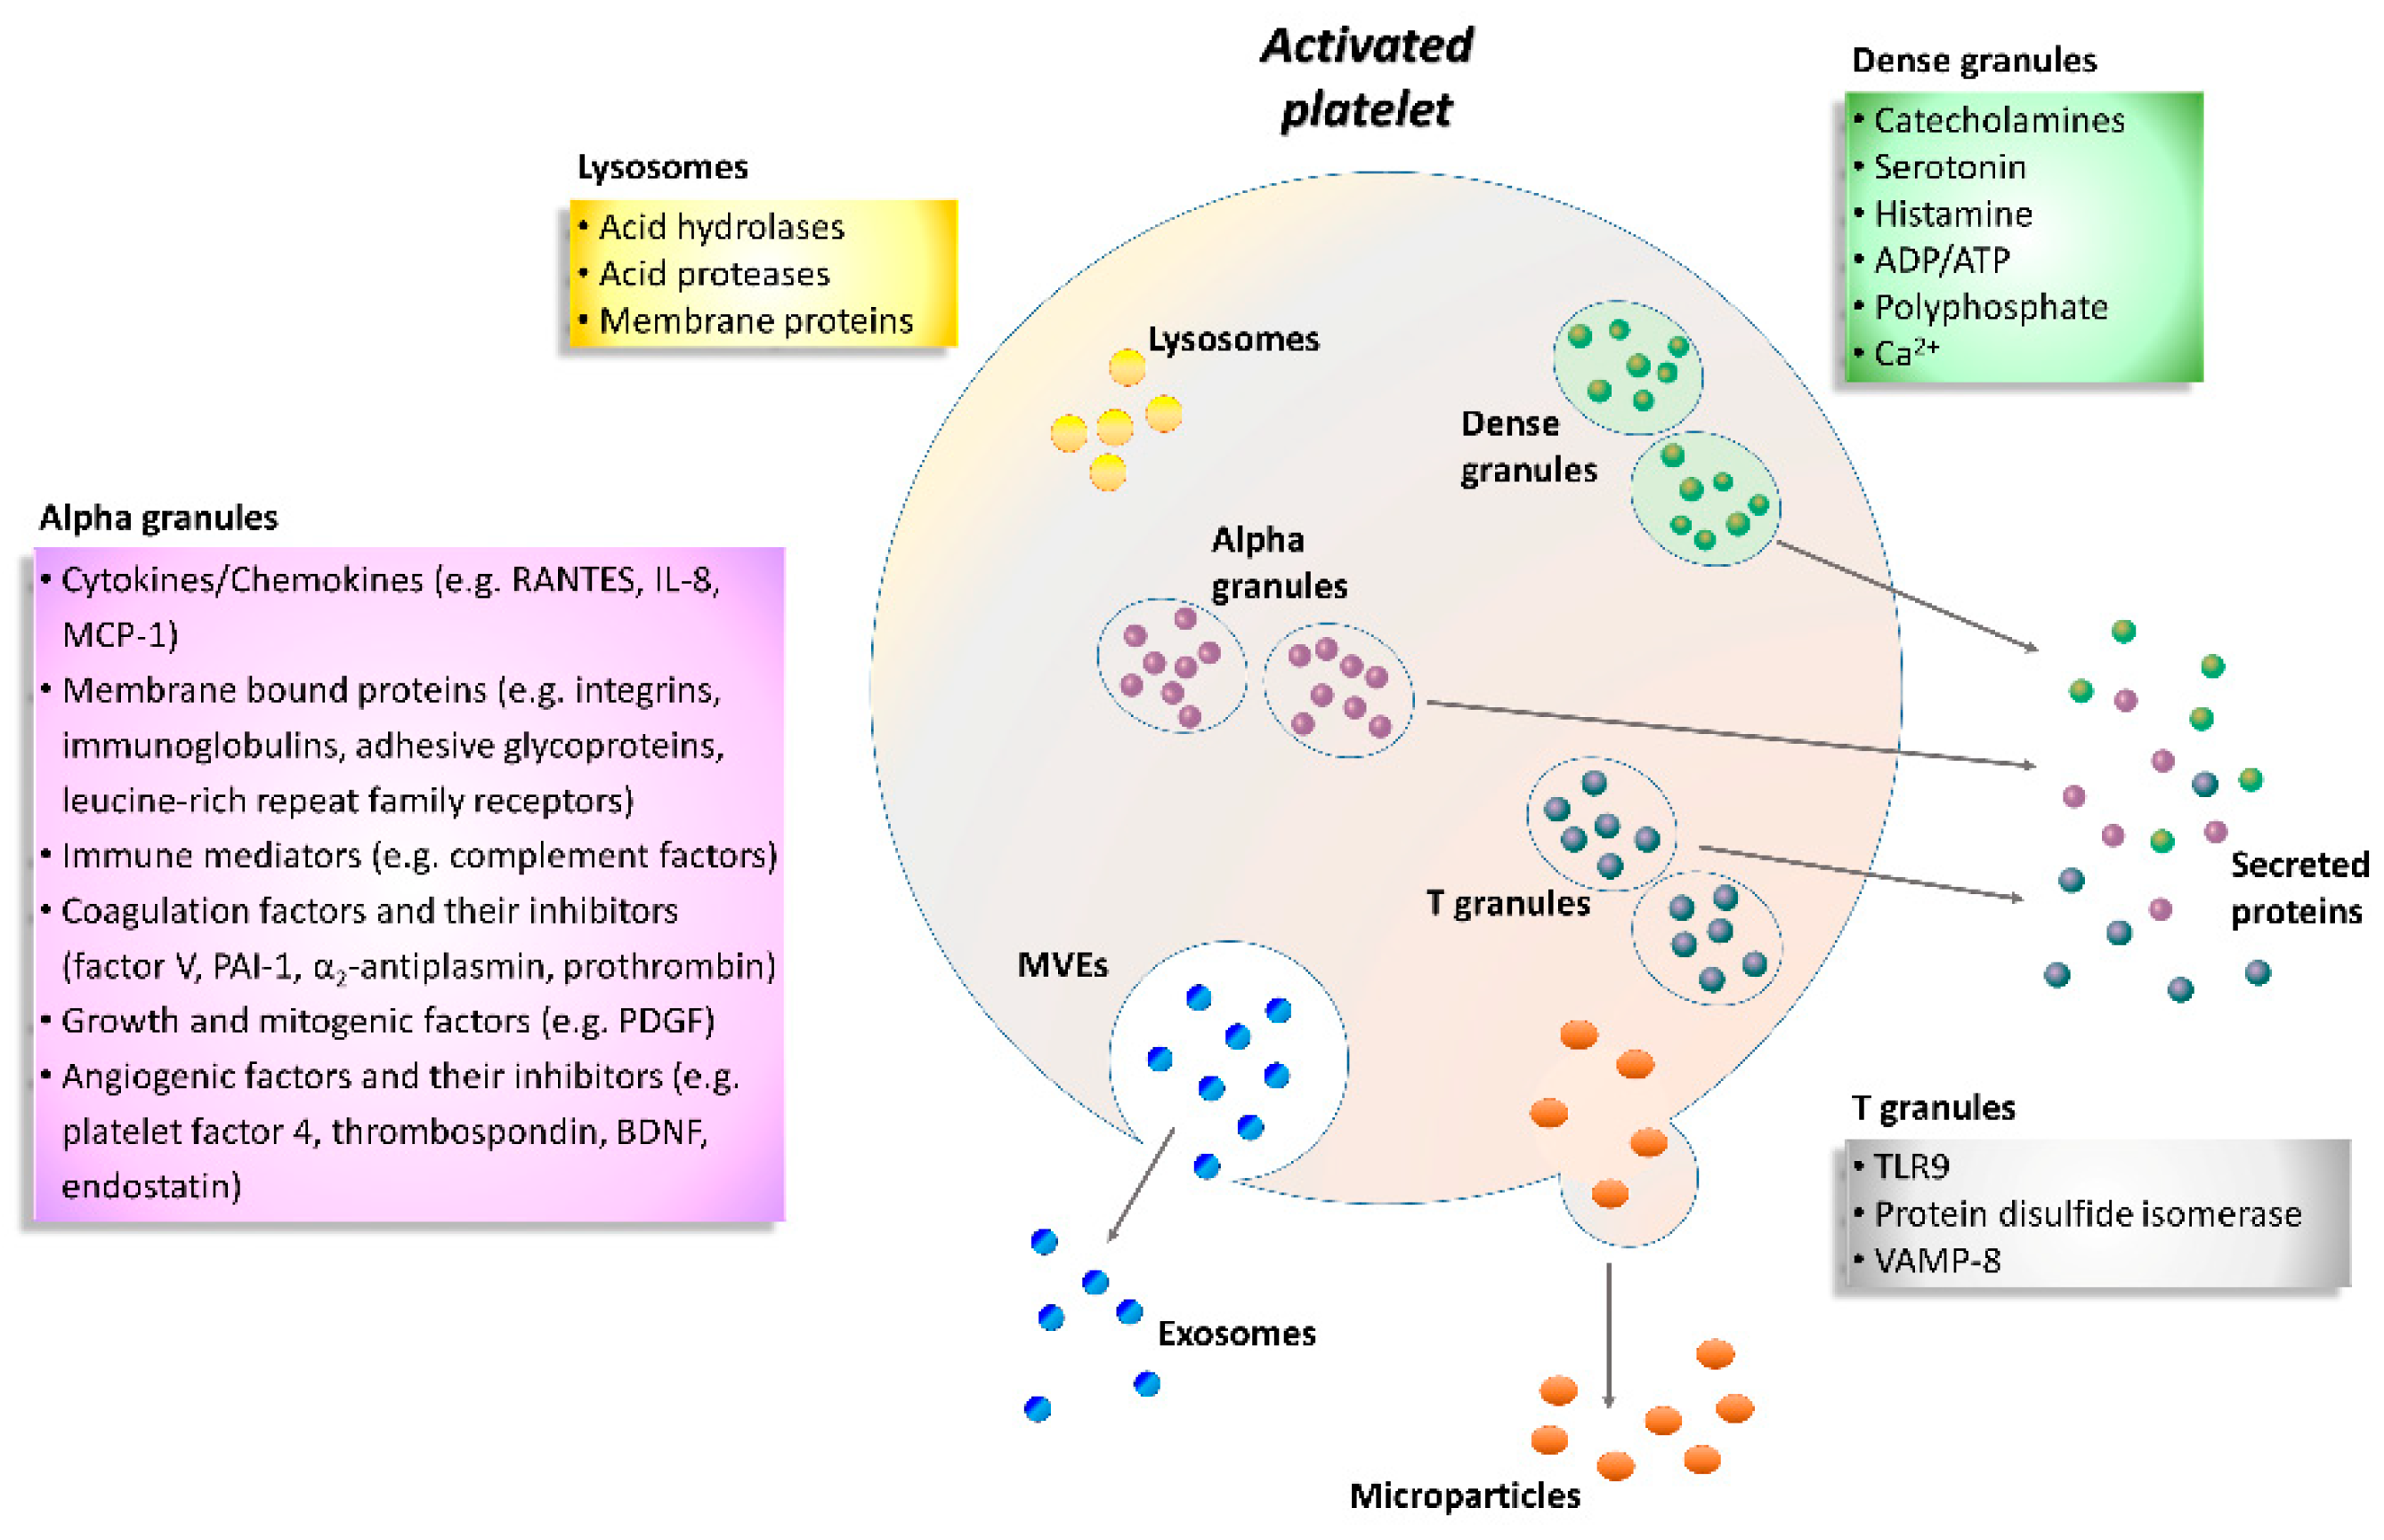 Ijms Free Full Text Platelets In Healthy And Disease States From Biomarkers Discovery To Drug Targets Identification By Proteomics Html